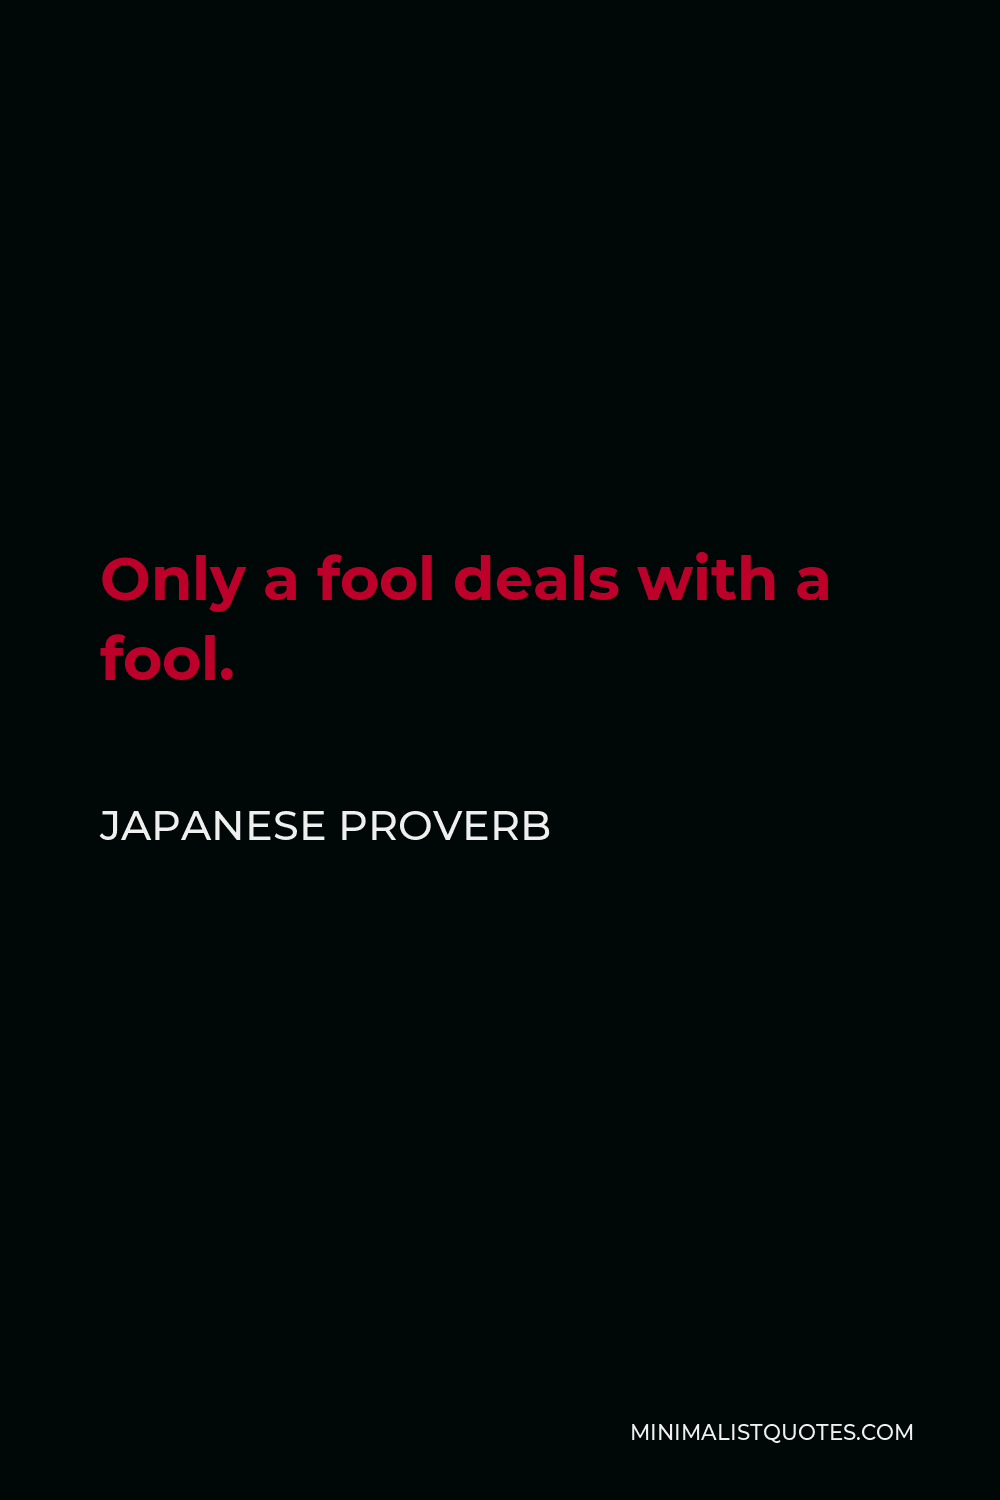 Japanese Proverb Quote - Only a fool deals with a fool.